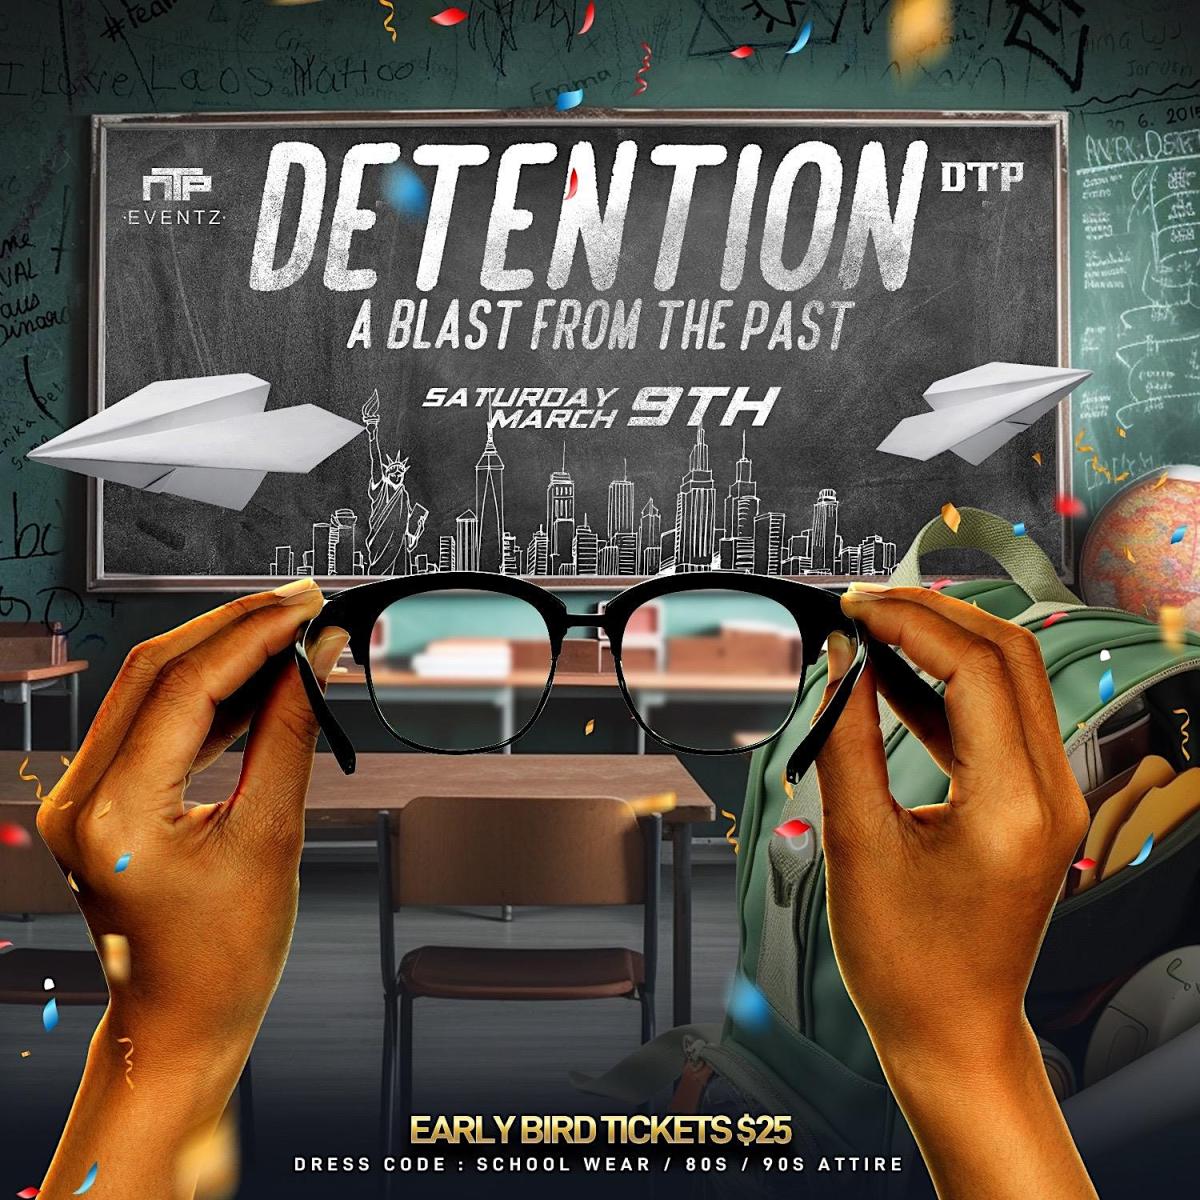 Detention flyer or graphic.